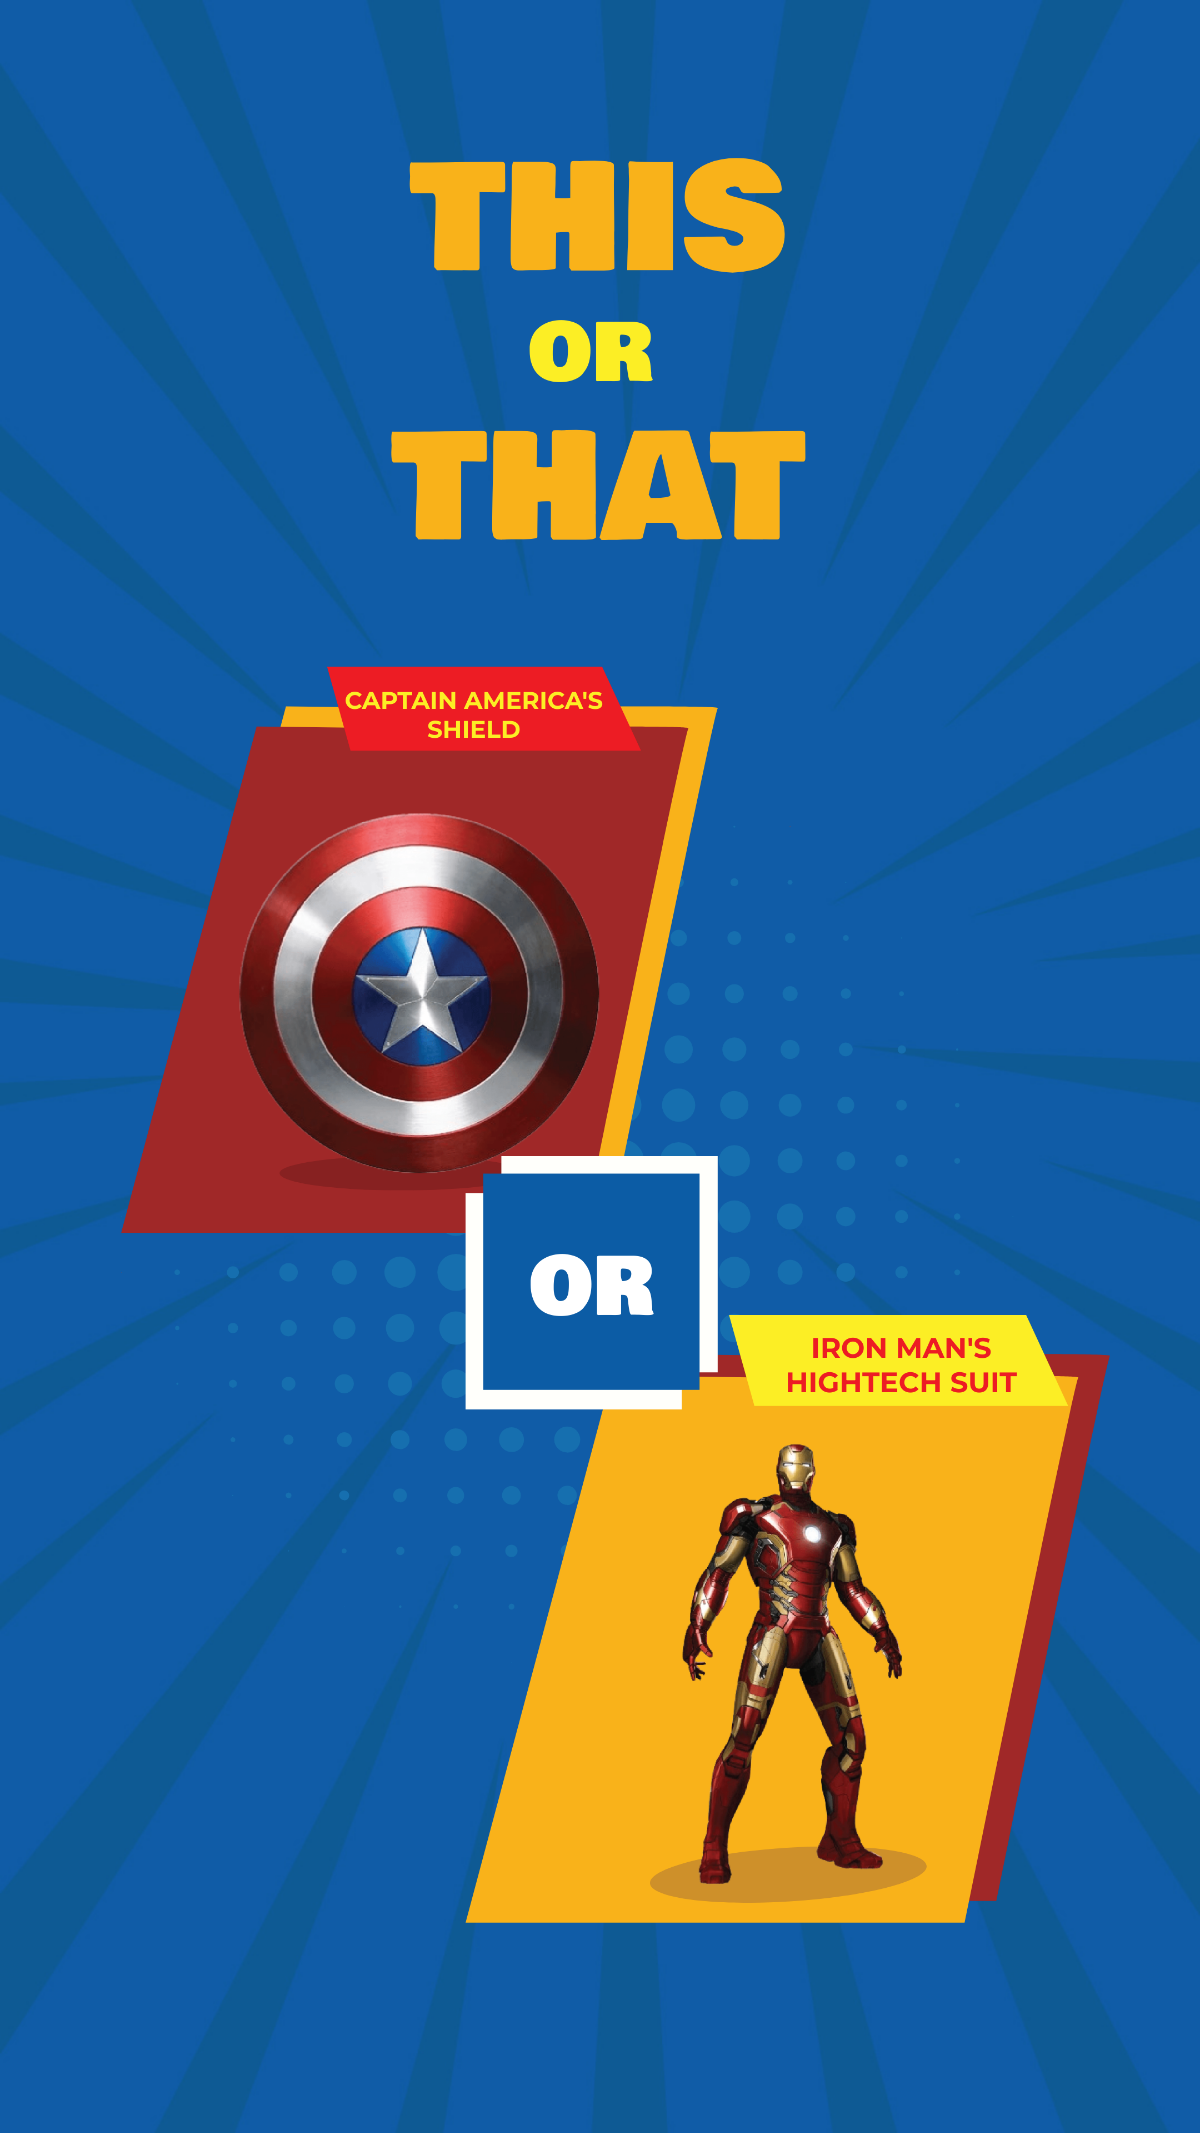 Free Iron Man or Captain America This or That Movie Story Template